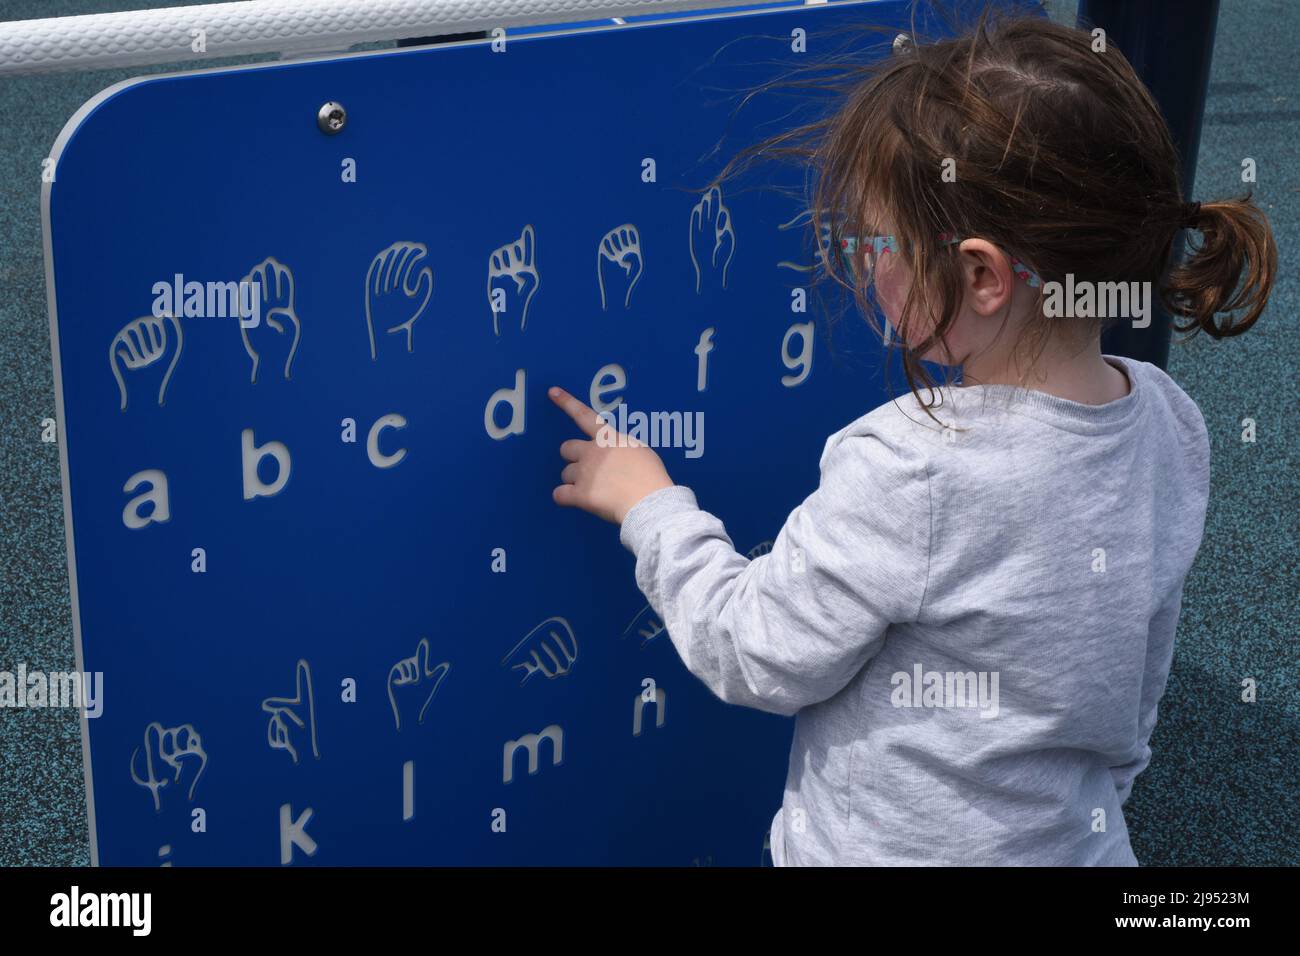 A young girl looks over a sign language chart in a playground in Edmonton, Alberta, Canada Stock Photo